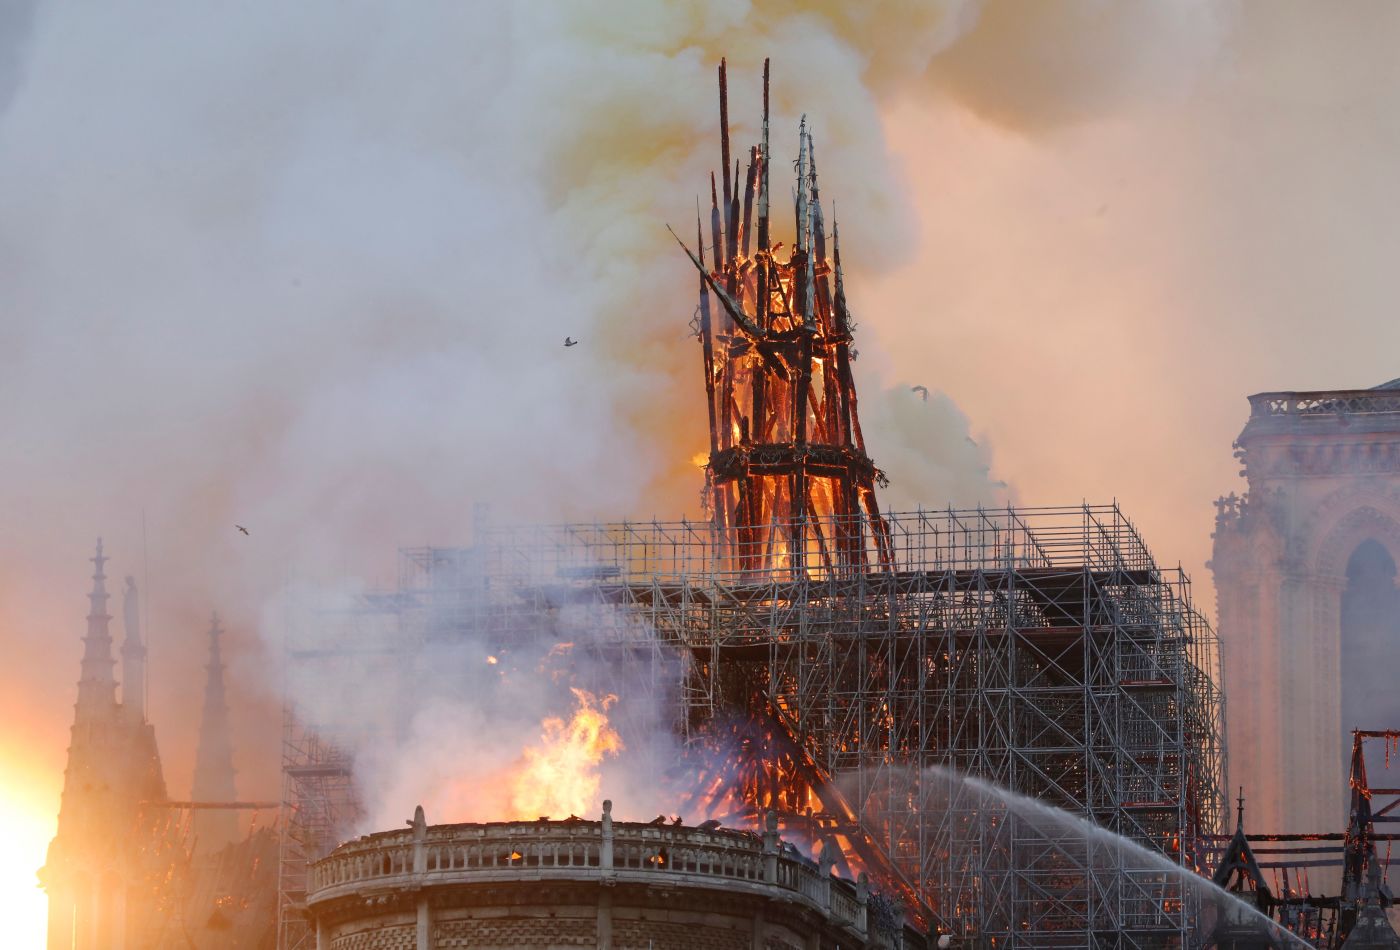 Left-wing “establishment media” going all-out to refute any suggestion that Notre Dame Cathedral fire could have been intentional